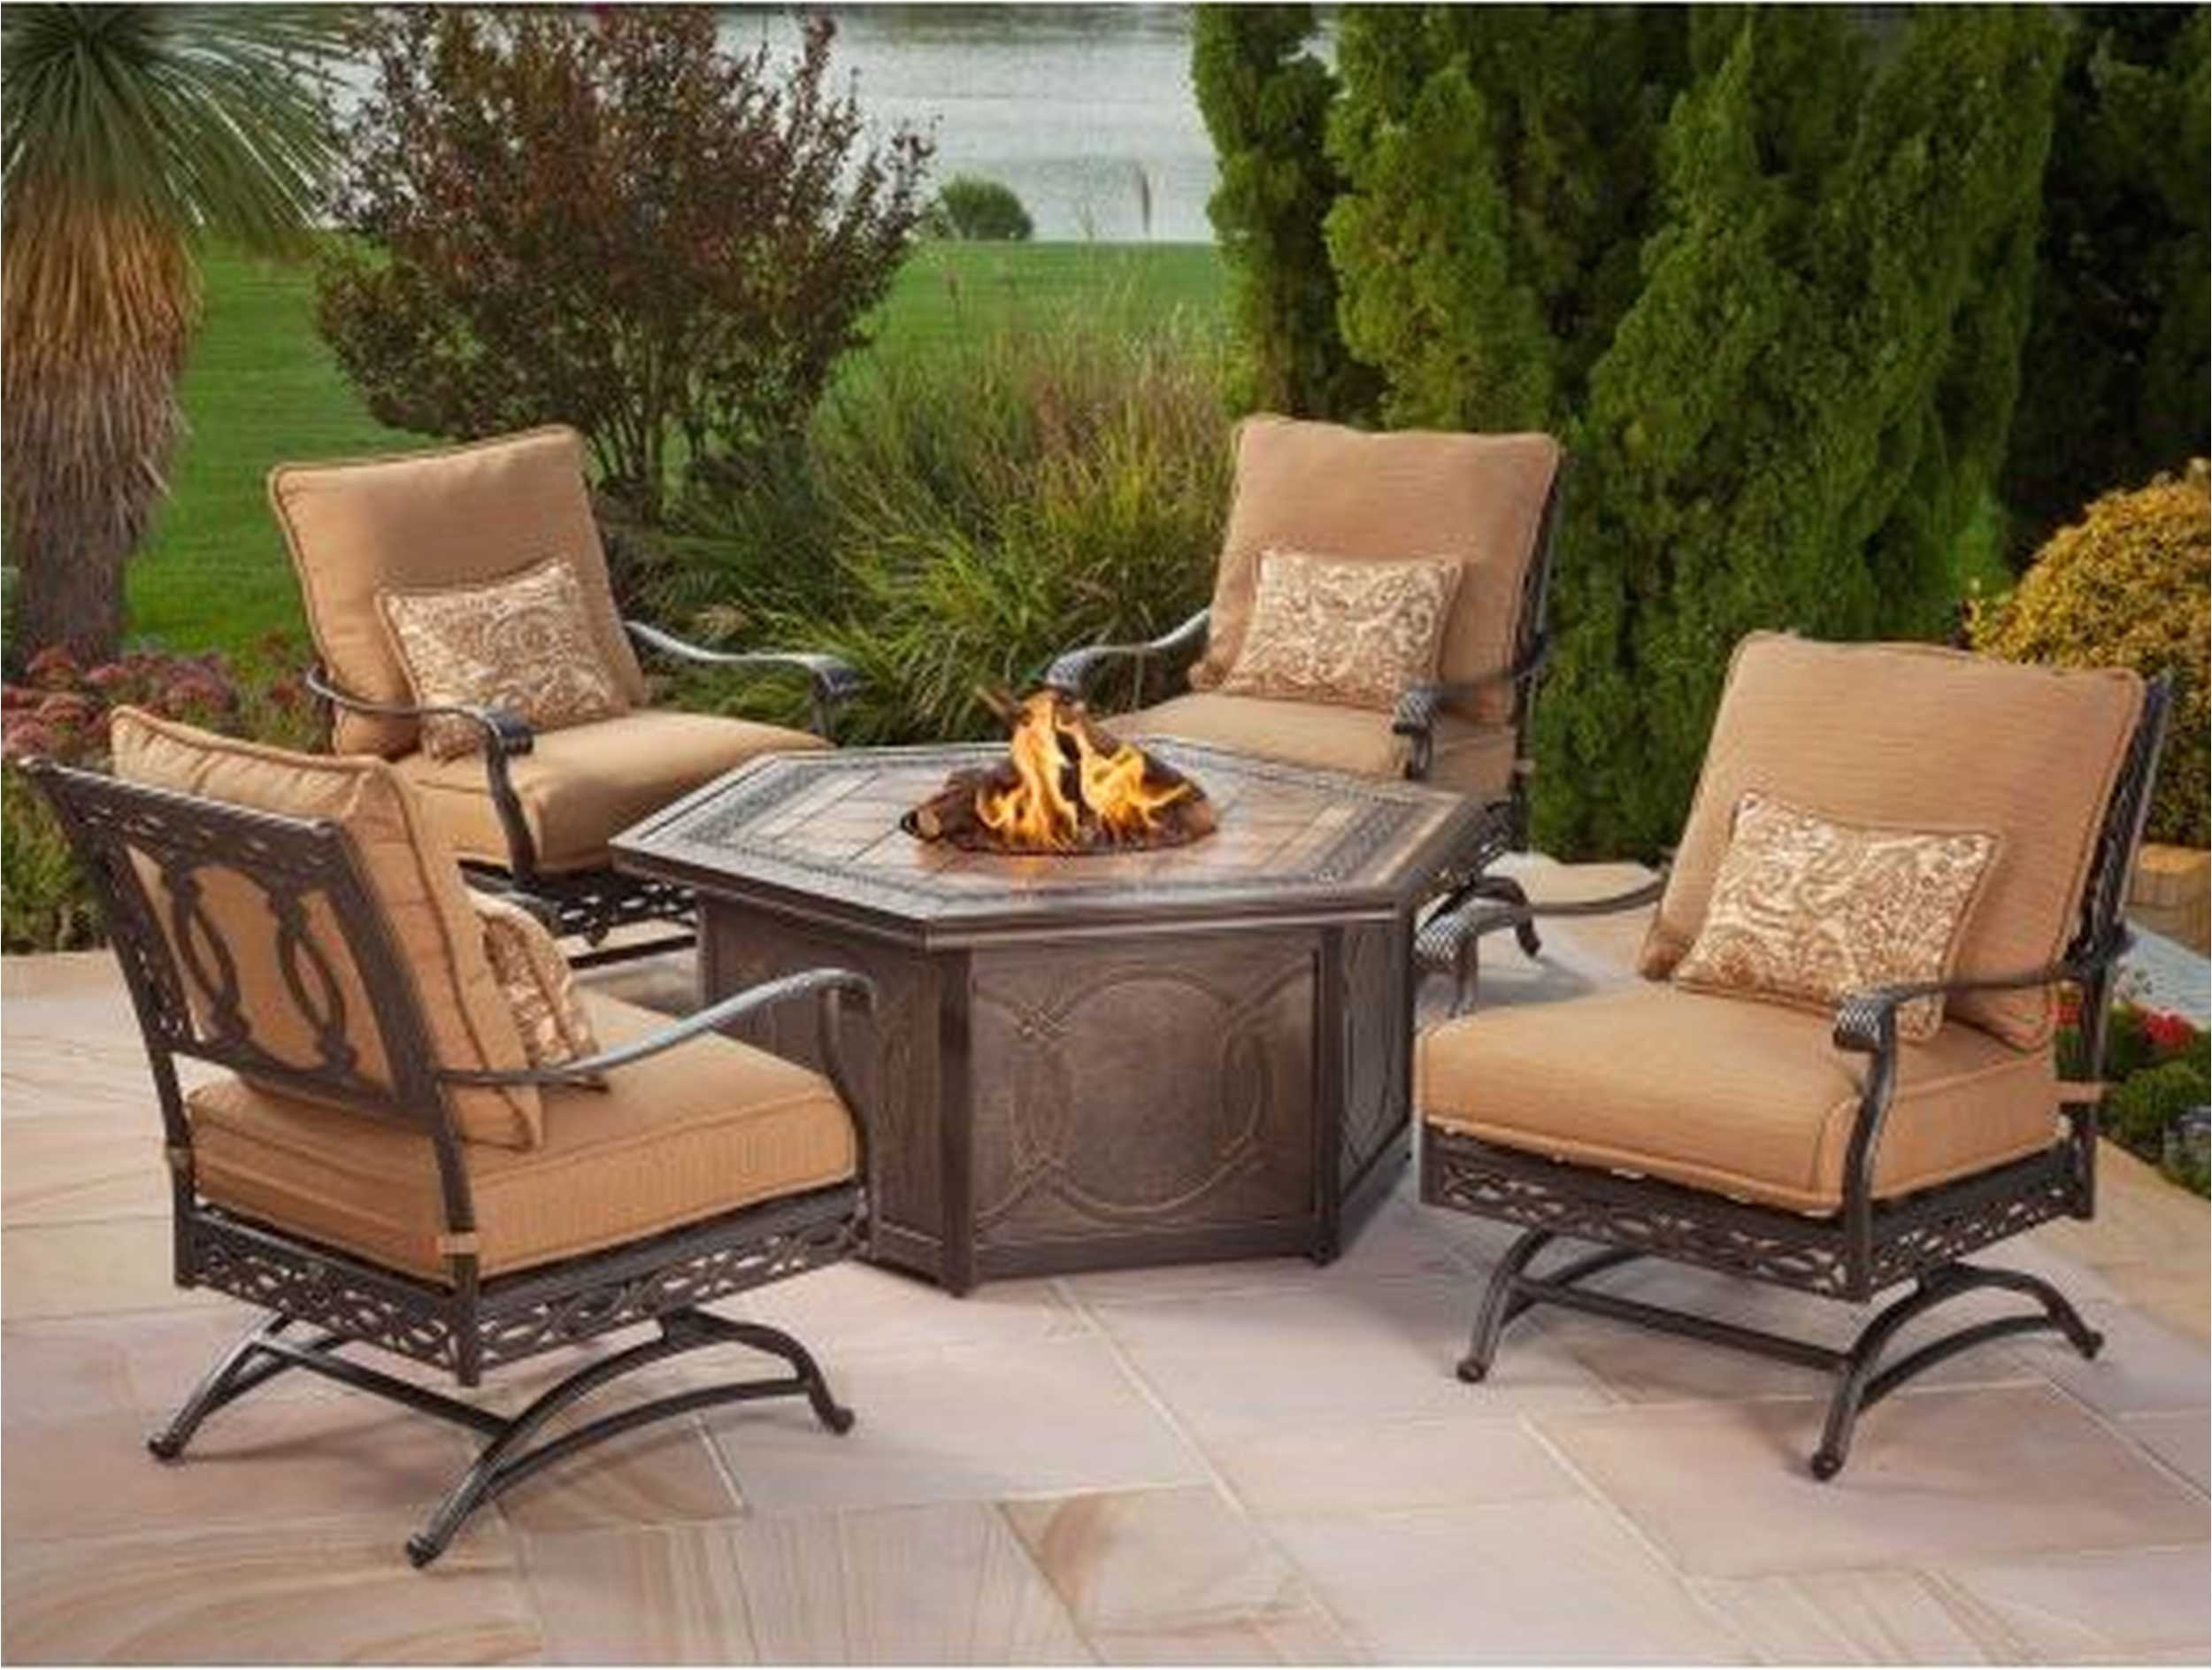 furniture patio furniture inspirational extraordinary outdoor chairs for sale 30 wicker sofa 0d patio